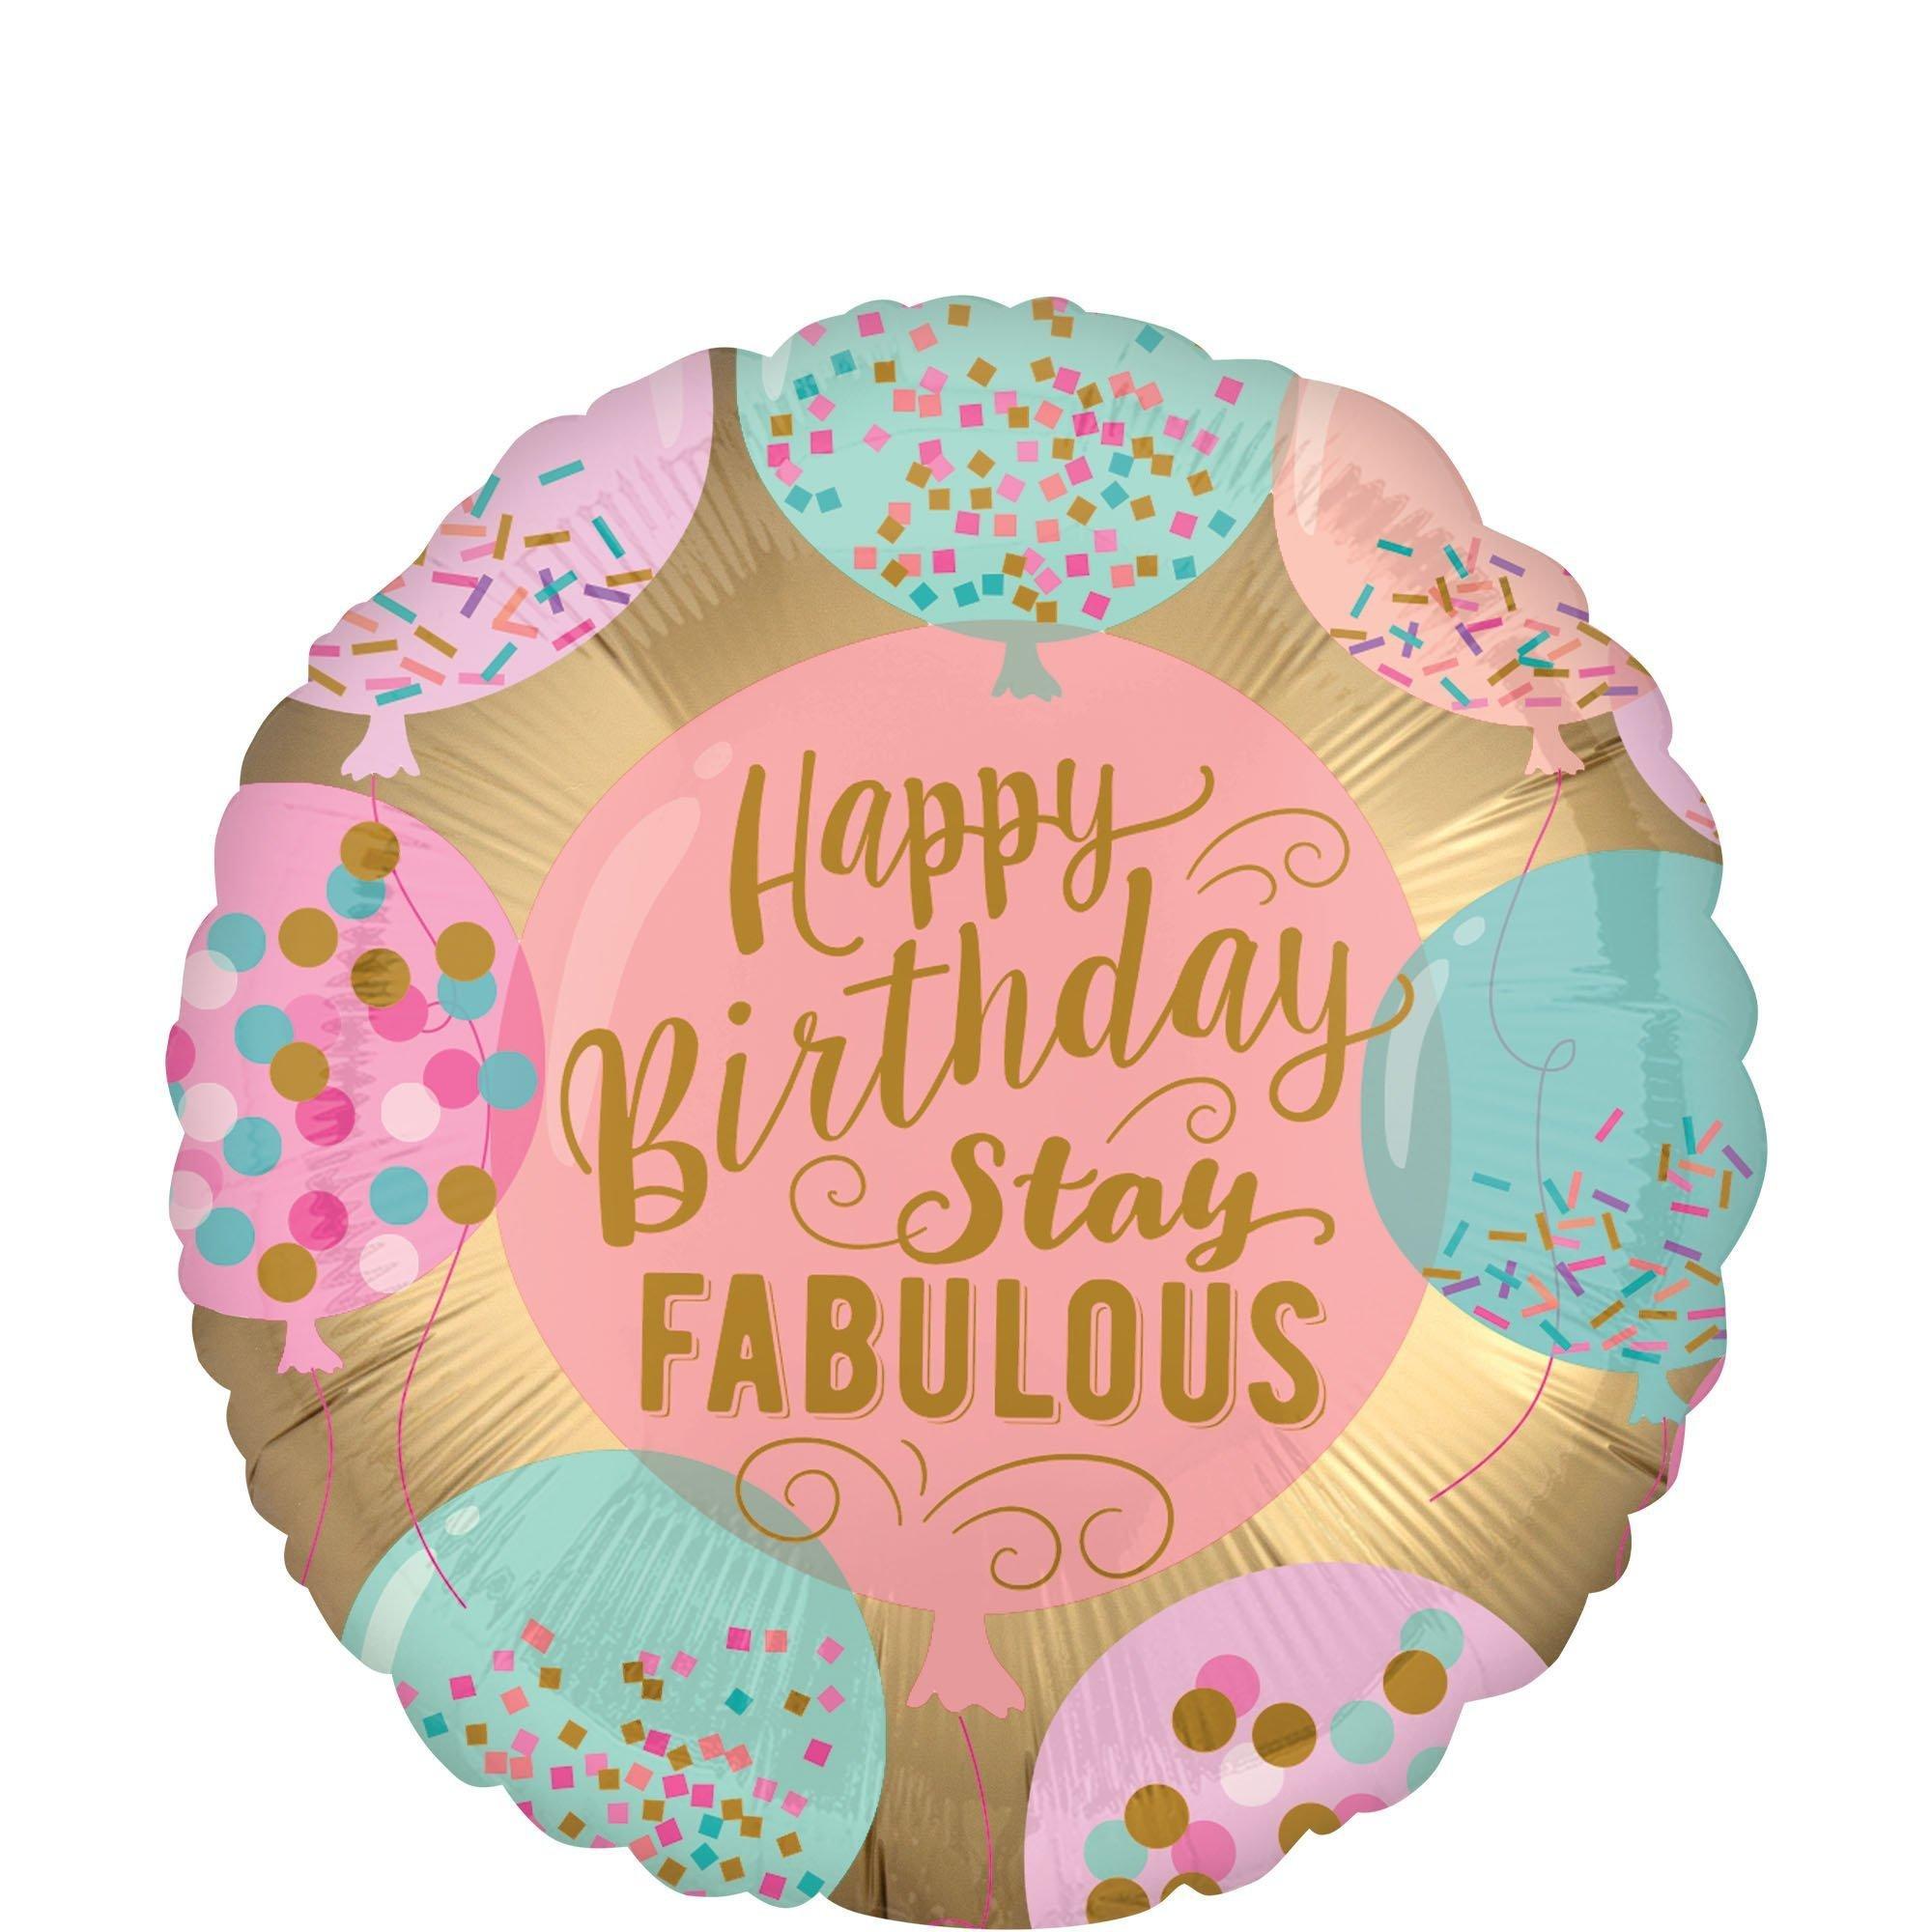 Happy Cake Day Birthday Foil Balloon Bouquet with Balloon Weight, 10pc